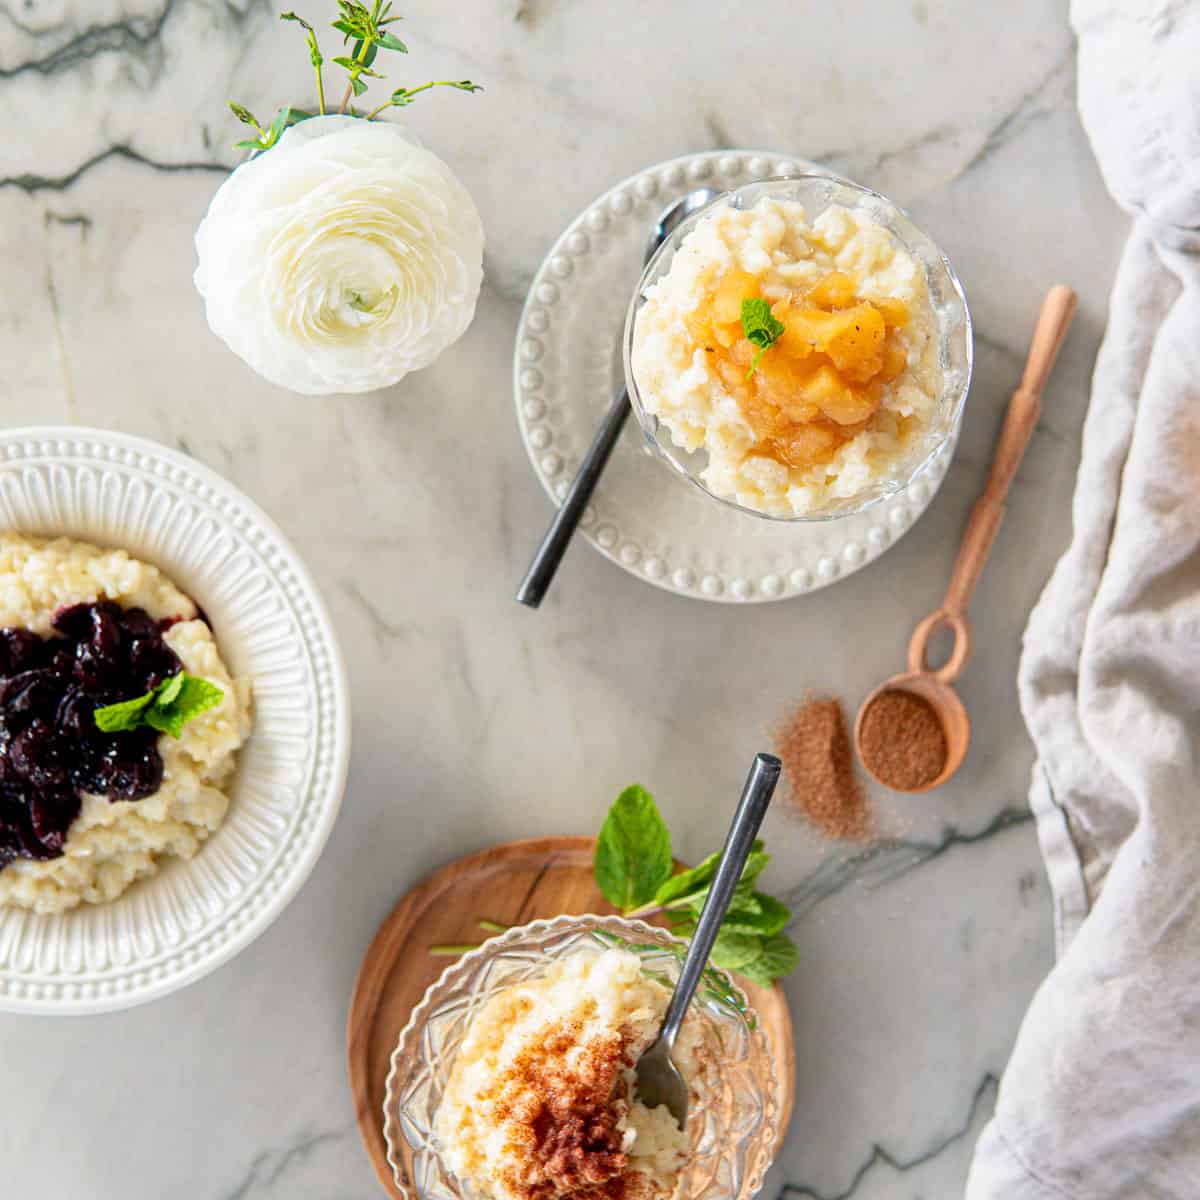 rice pudding with different toppings